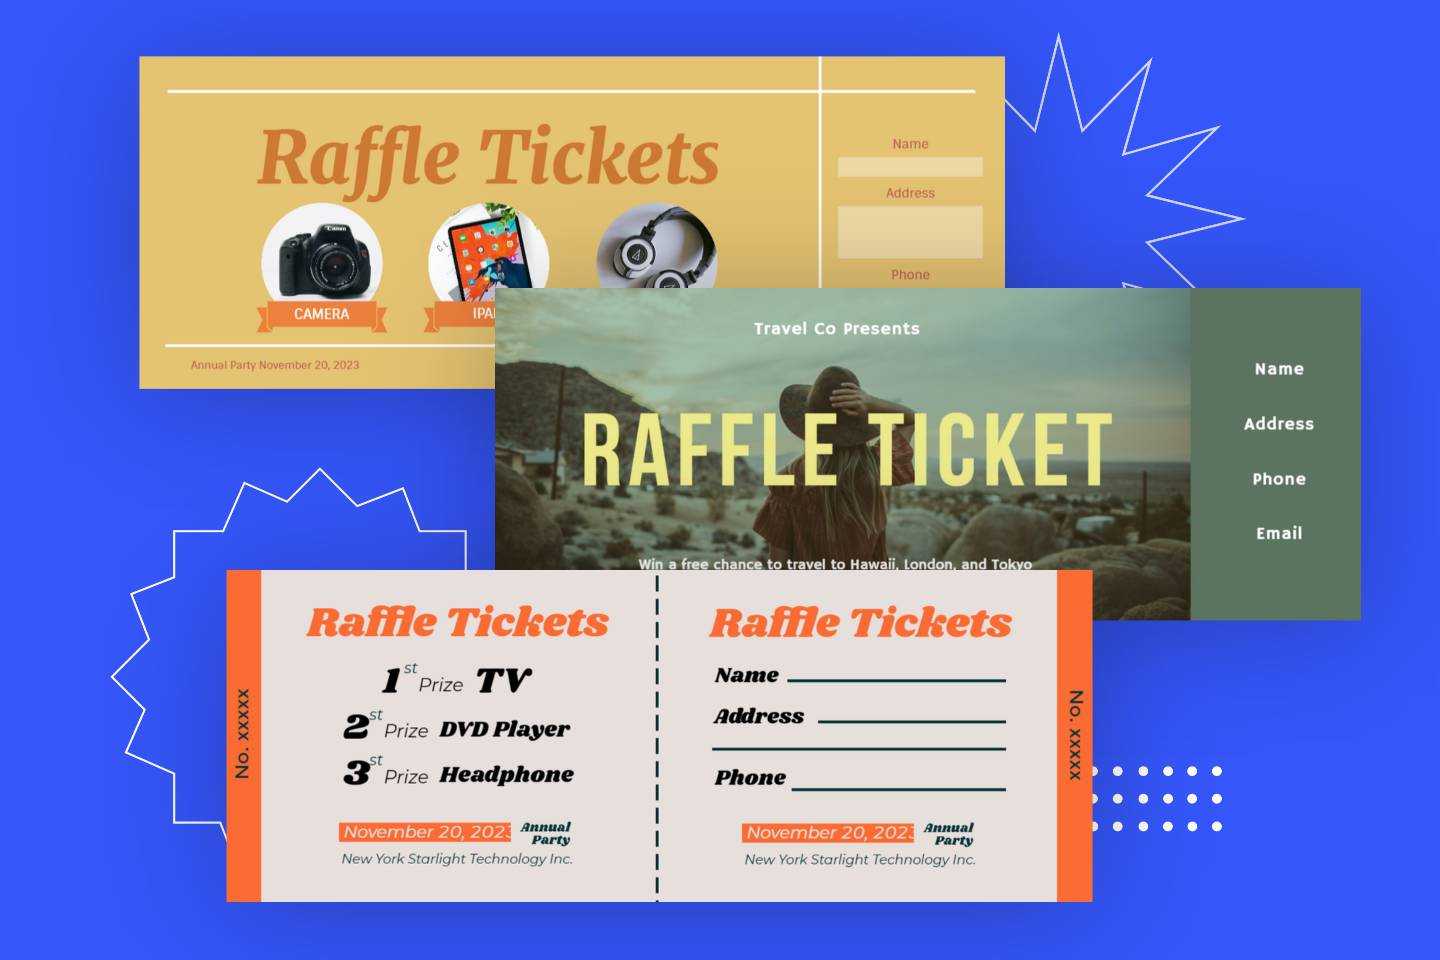 one red raffle ticket